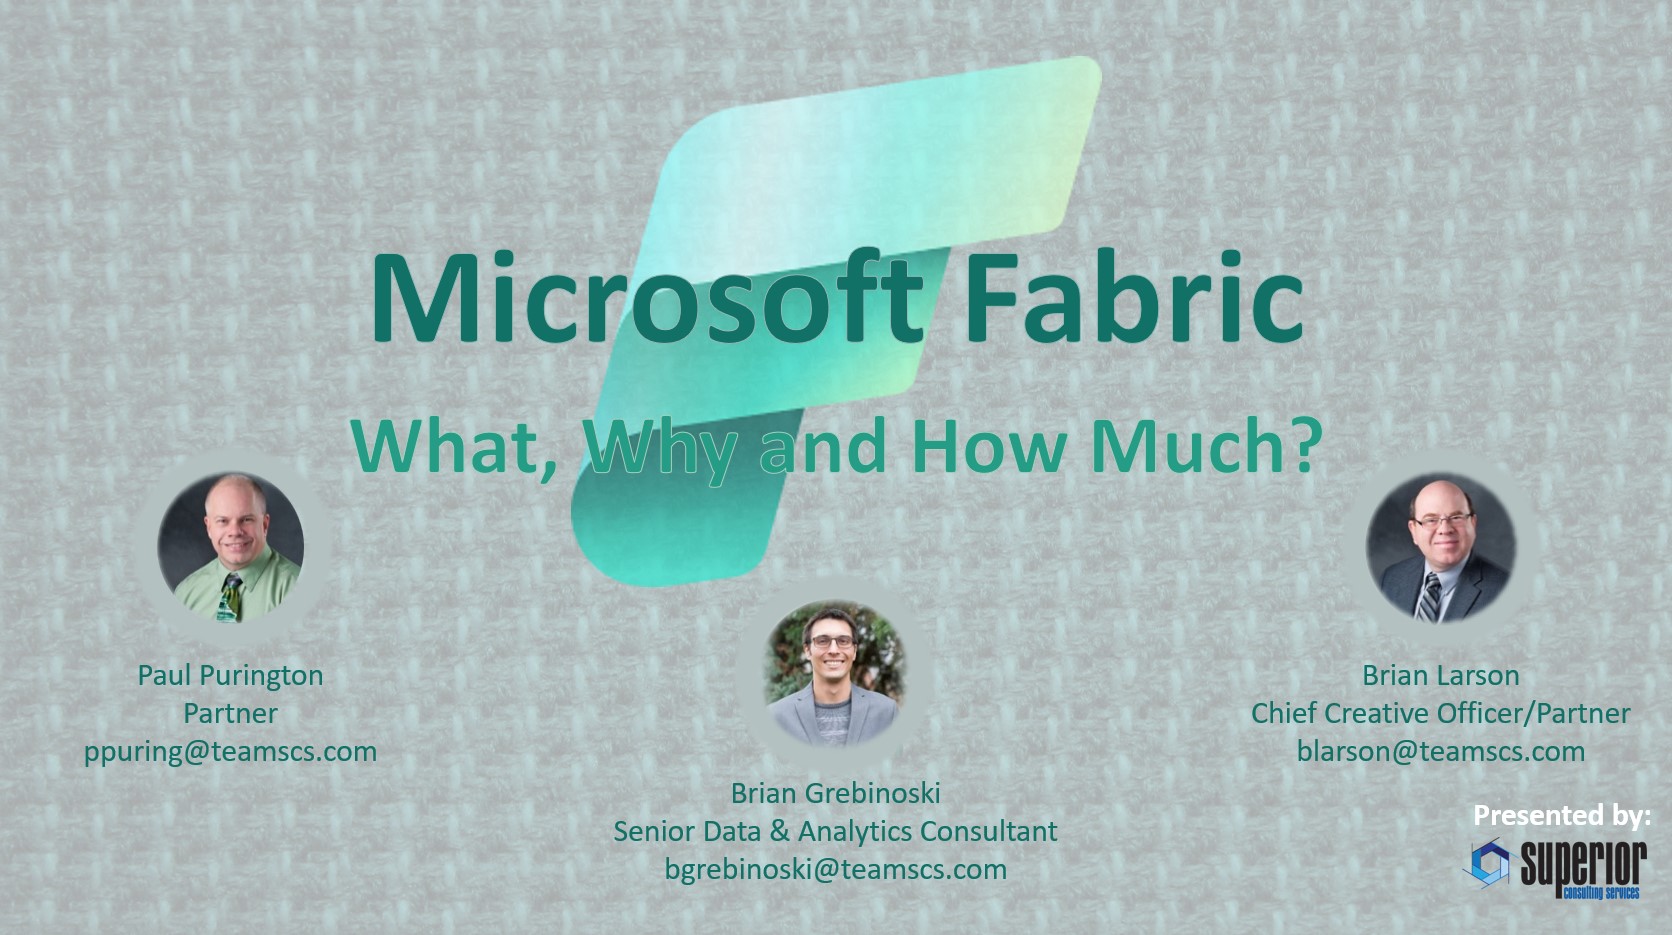 Webinar: Microsoft Fabric - What, Why and How Much